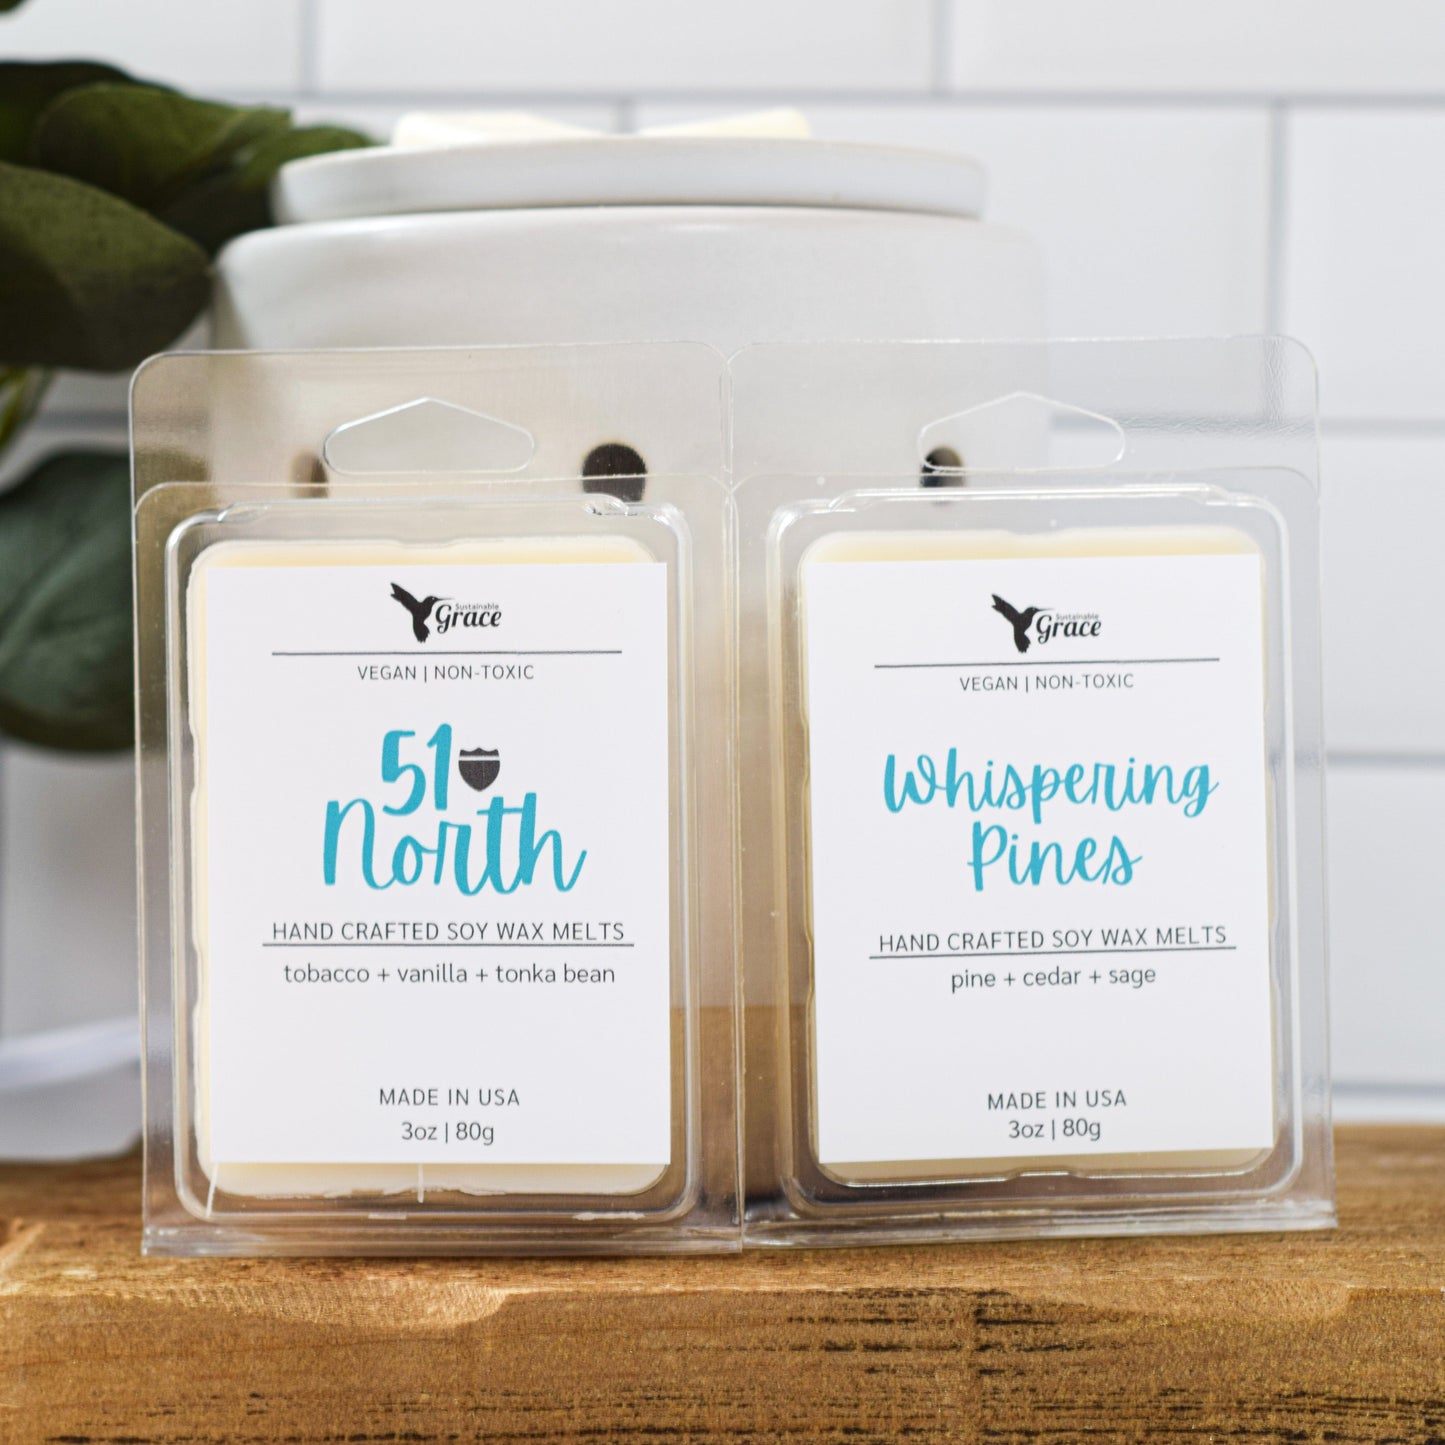 51 north and whispering pines soy based wax melts